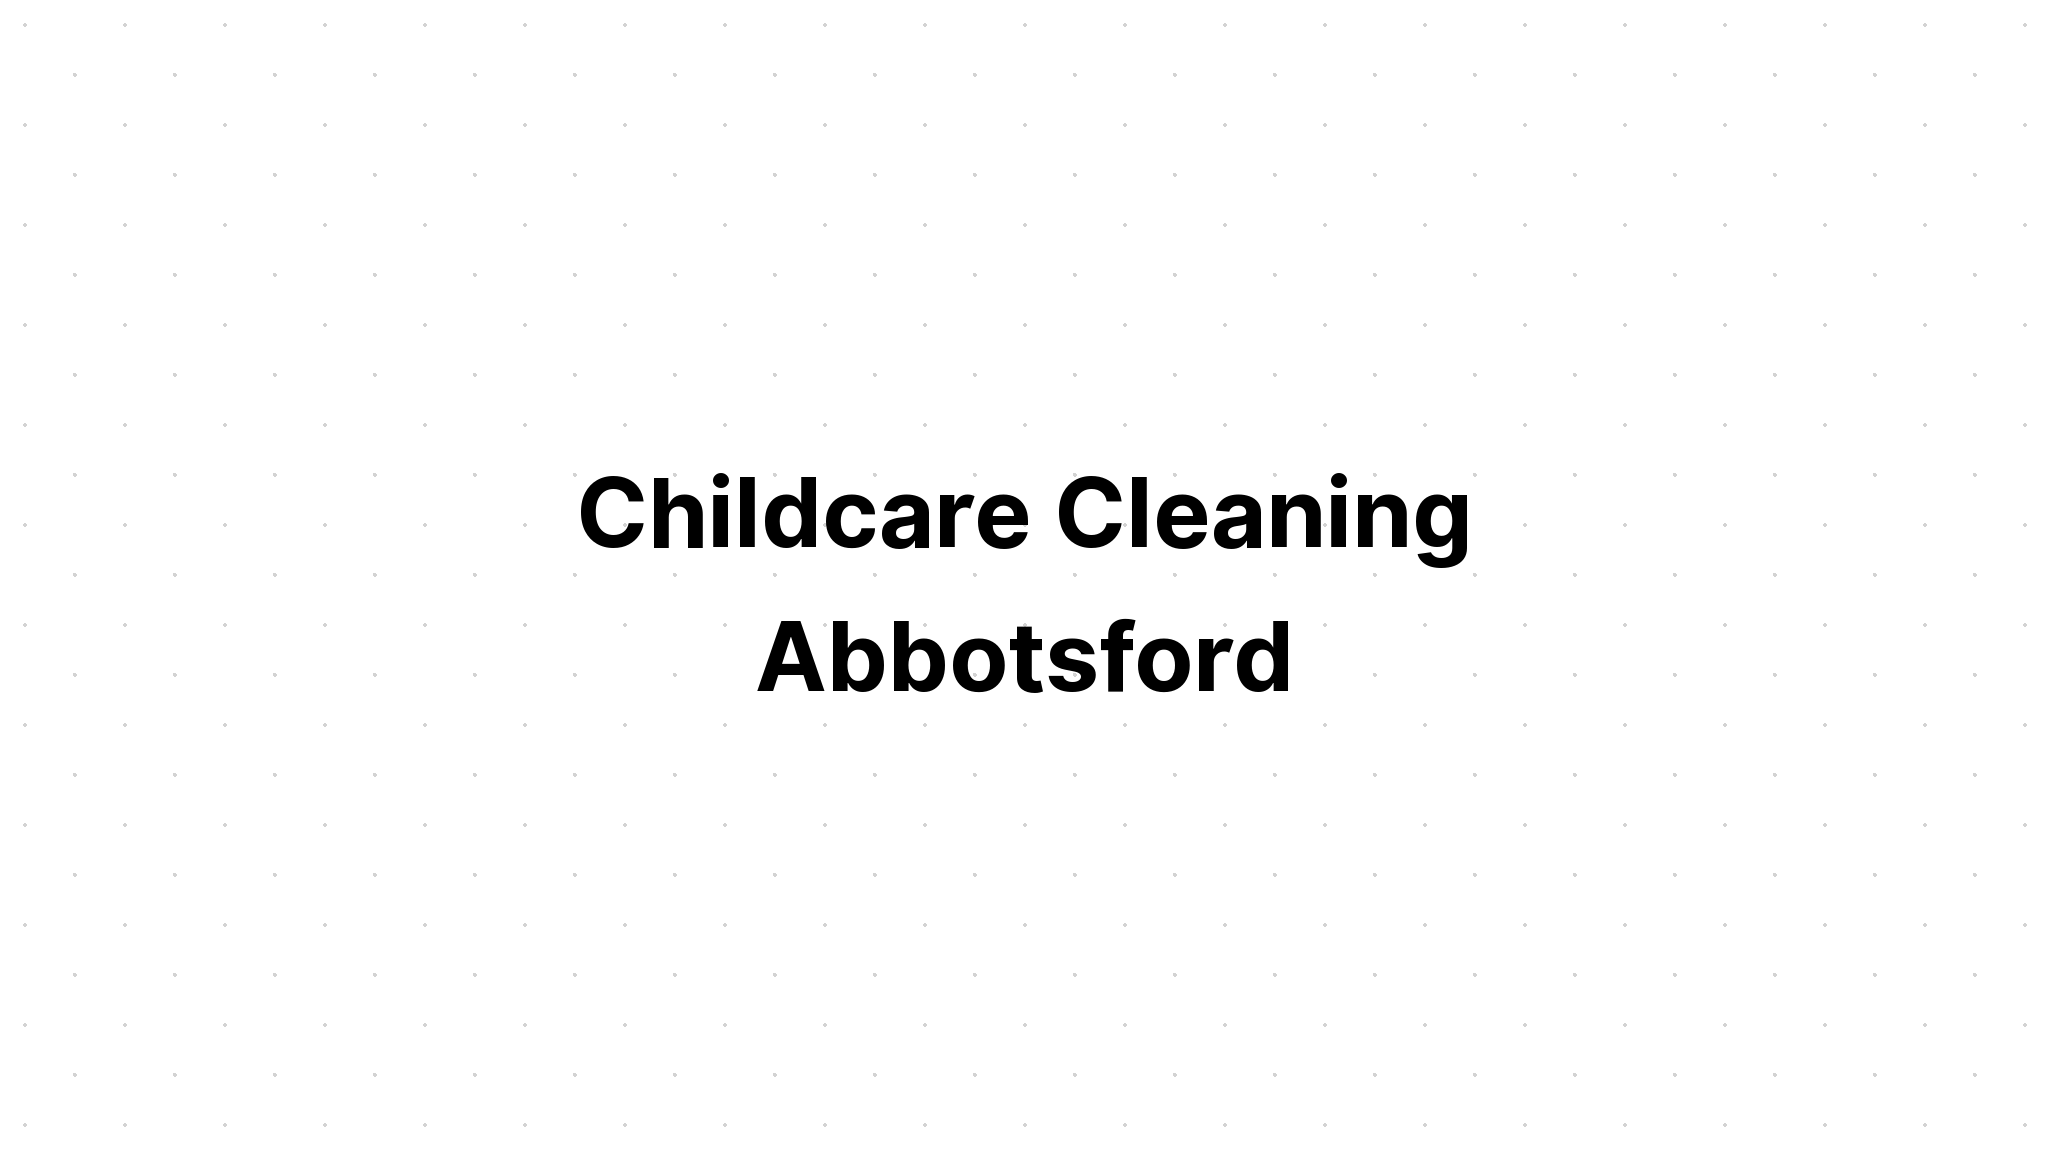 childcare-cleaning-abbotsford-whistle-clean-australia